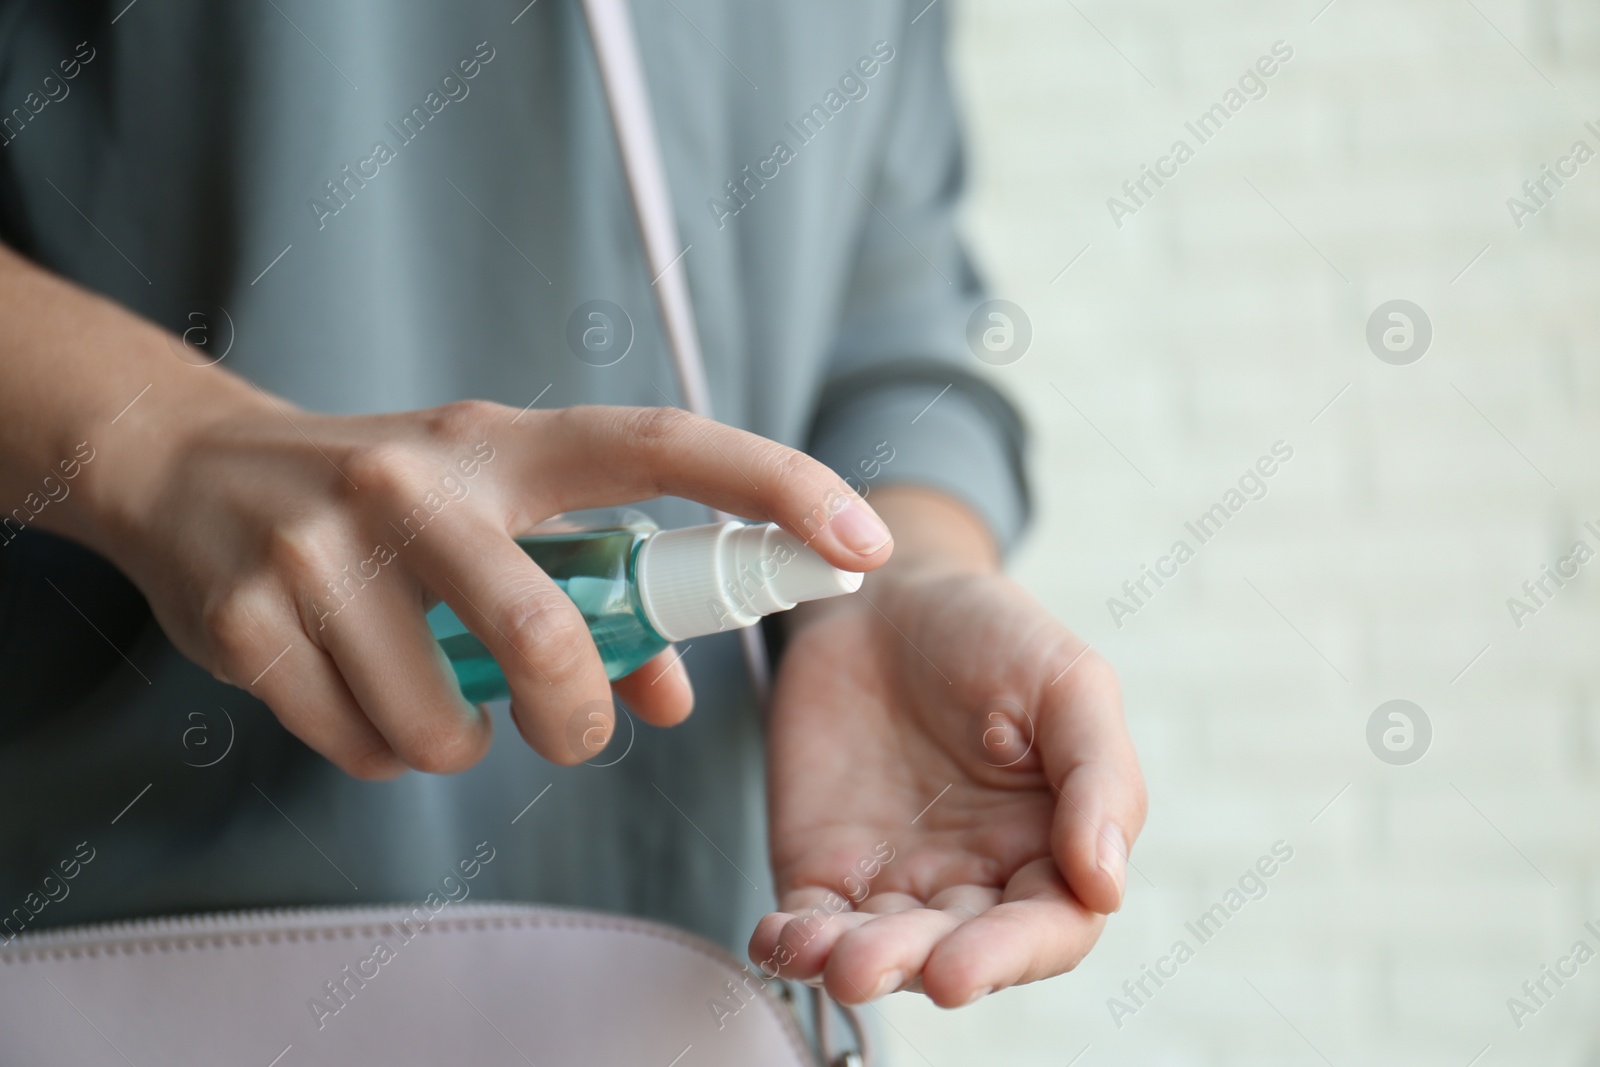 Photo of Woman applying hand sanitizer on light background, closeup. Personal hygiene during COVID-19 pandemic